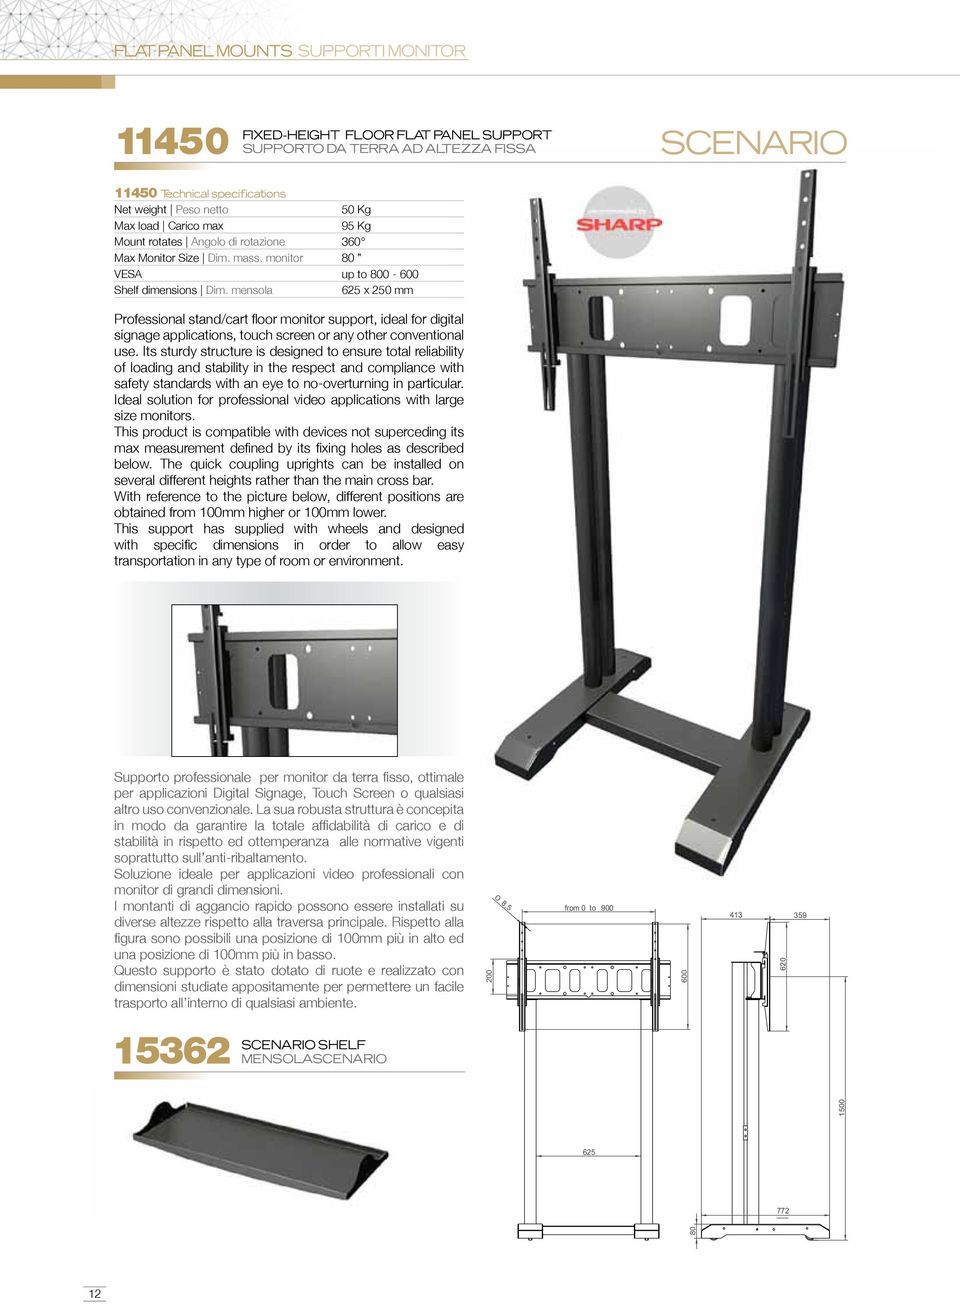 mensola 625 x 250 mm Professional stand/cart floor monitor support, ideal for digital signage applications, touch screen or any other conventional use.